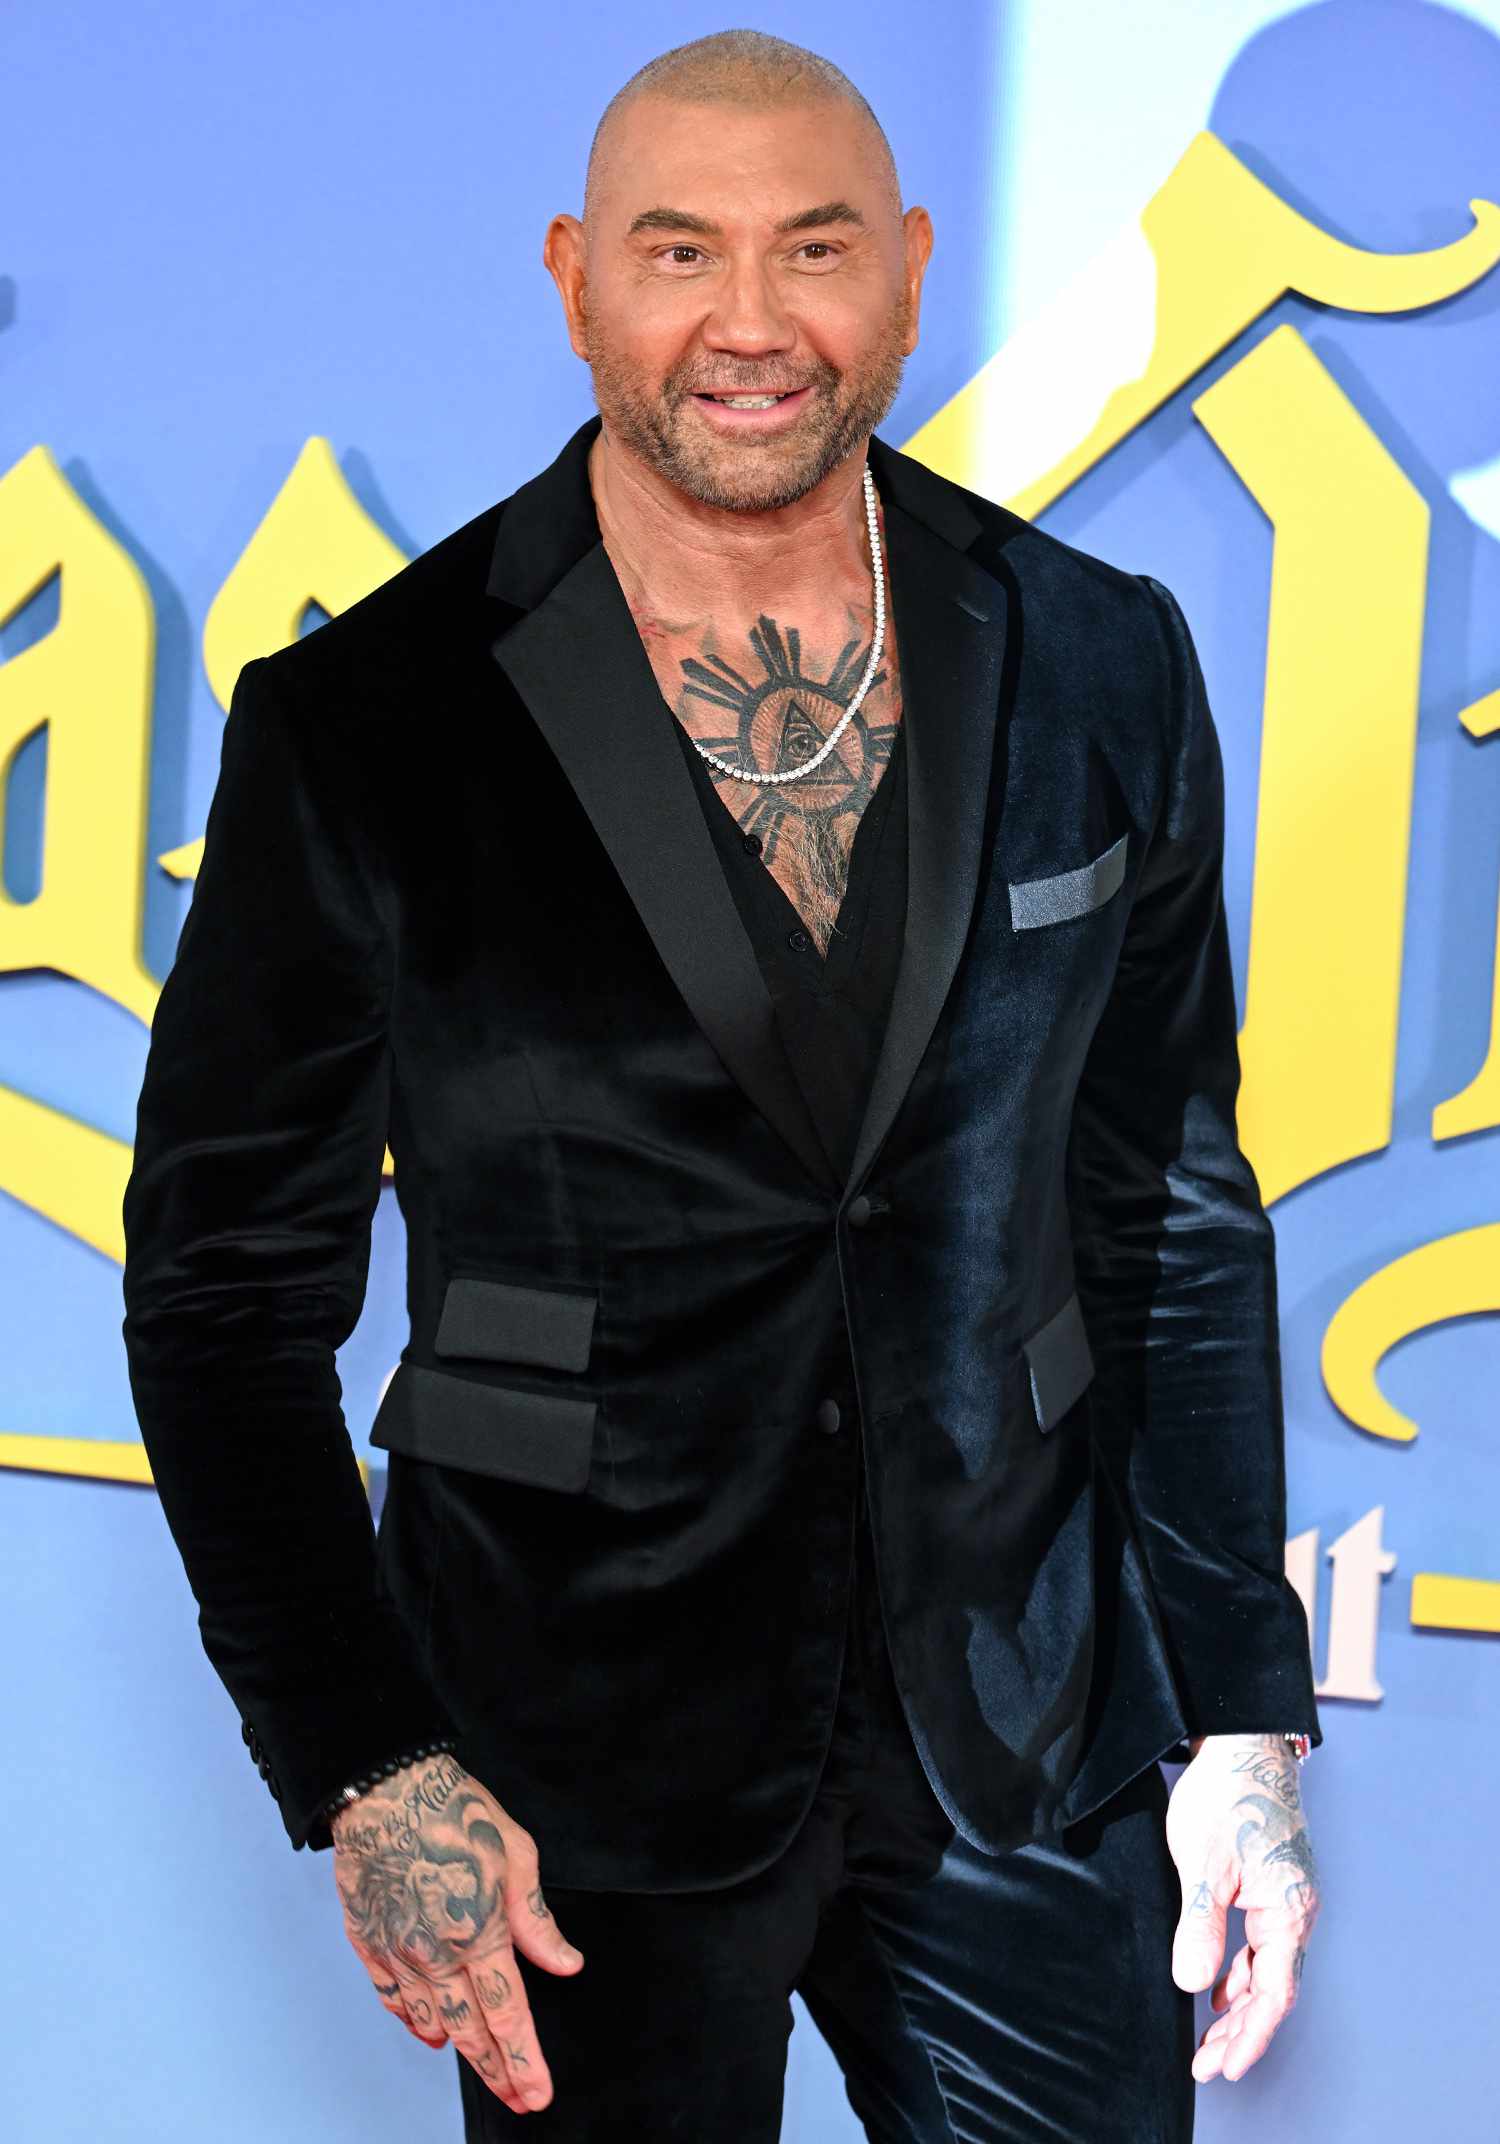 Dave Bautista Recalls ‘Embarrassing’ First Tattoo He Got on His Butt: ‘I Regretted It Immediately’